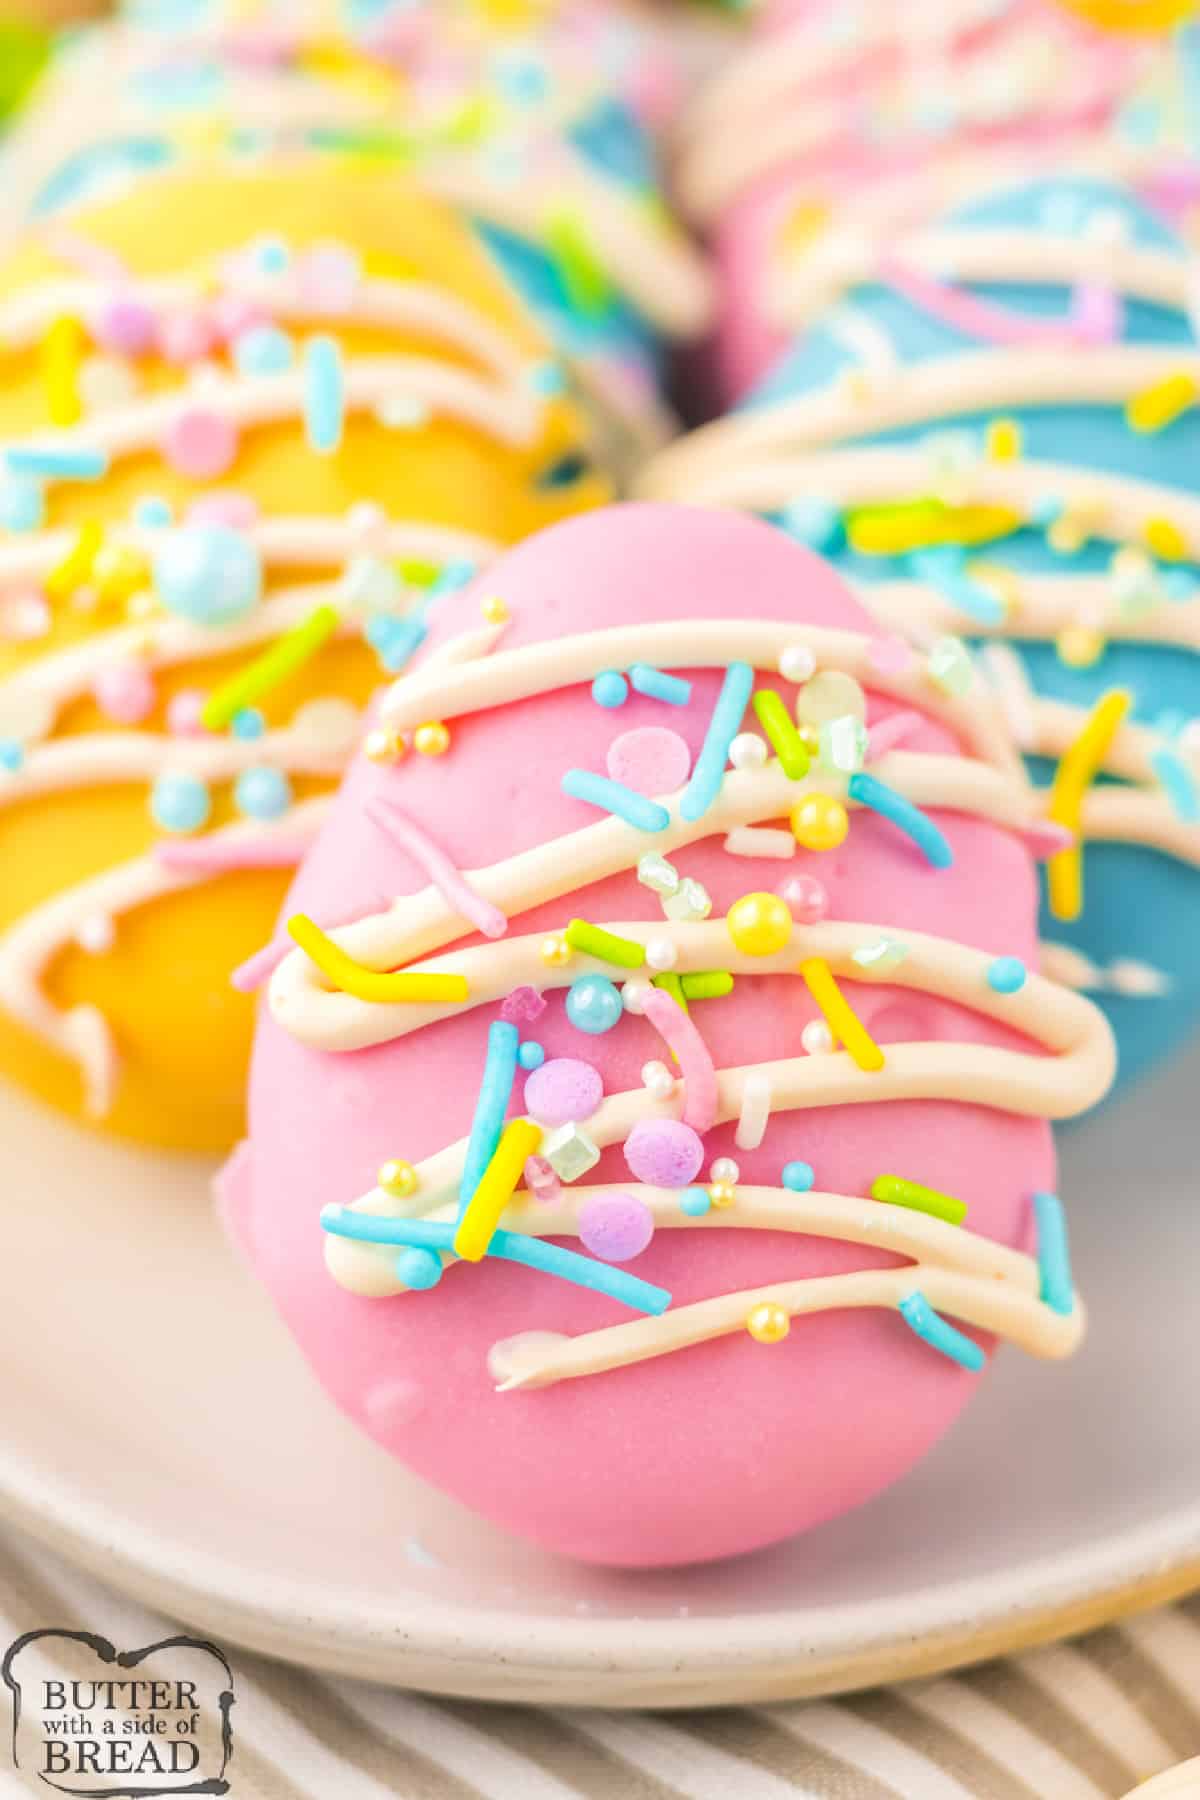 Cookie Dough Easter Eggs are the perfect no-bake dessert for Easter. Edible cookie dough in the shape of Easter eggs that are dipped in pastel-colored chocolate and then decorated.  